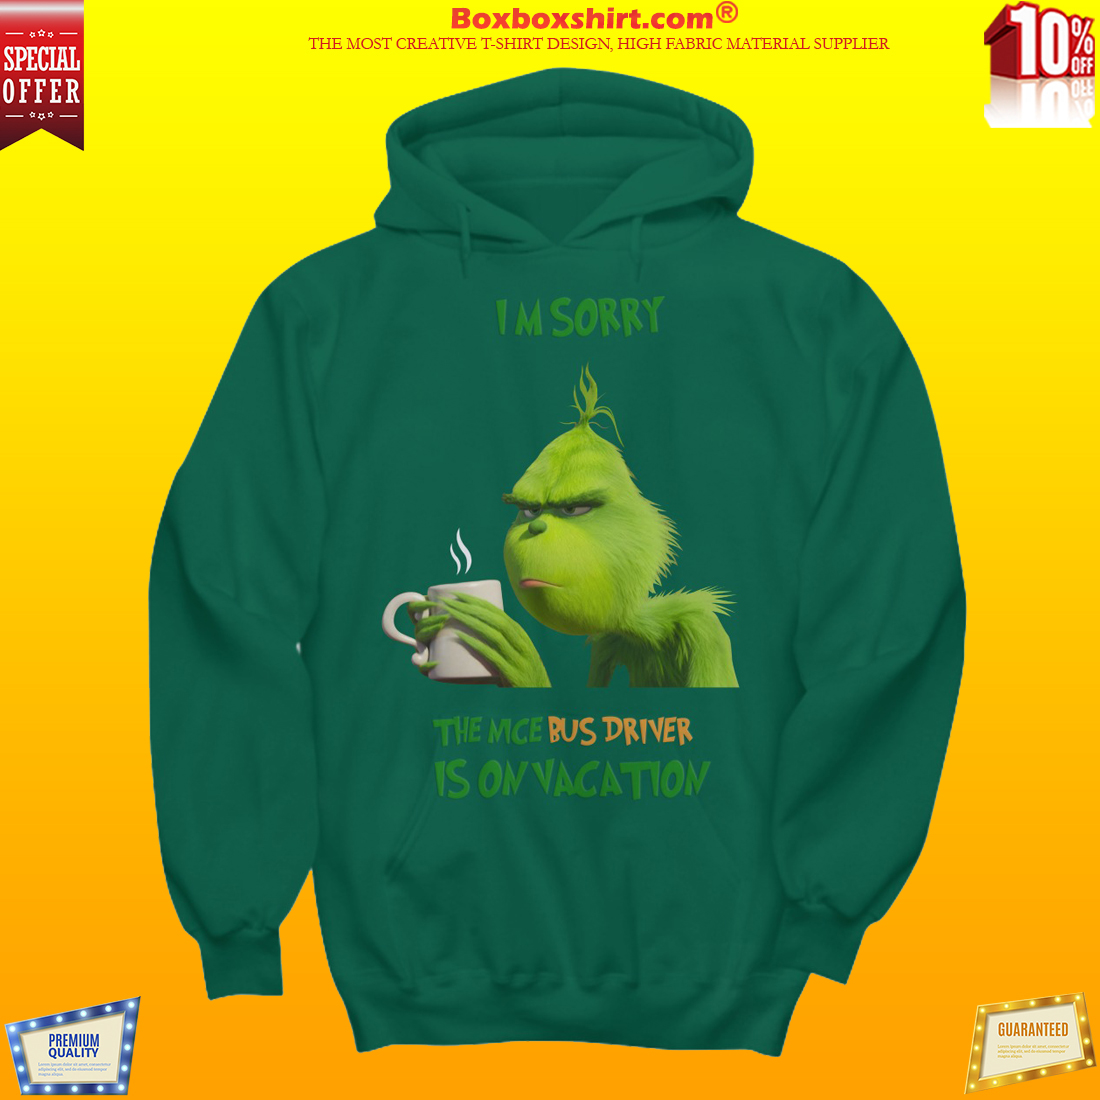 Grinch Im sorry the nice bus driver is on vacation shirt